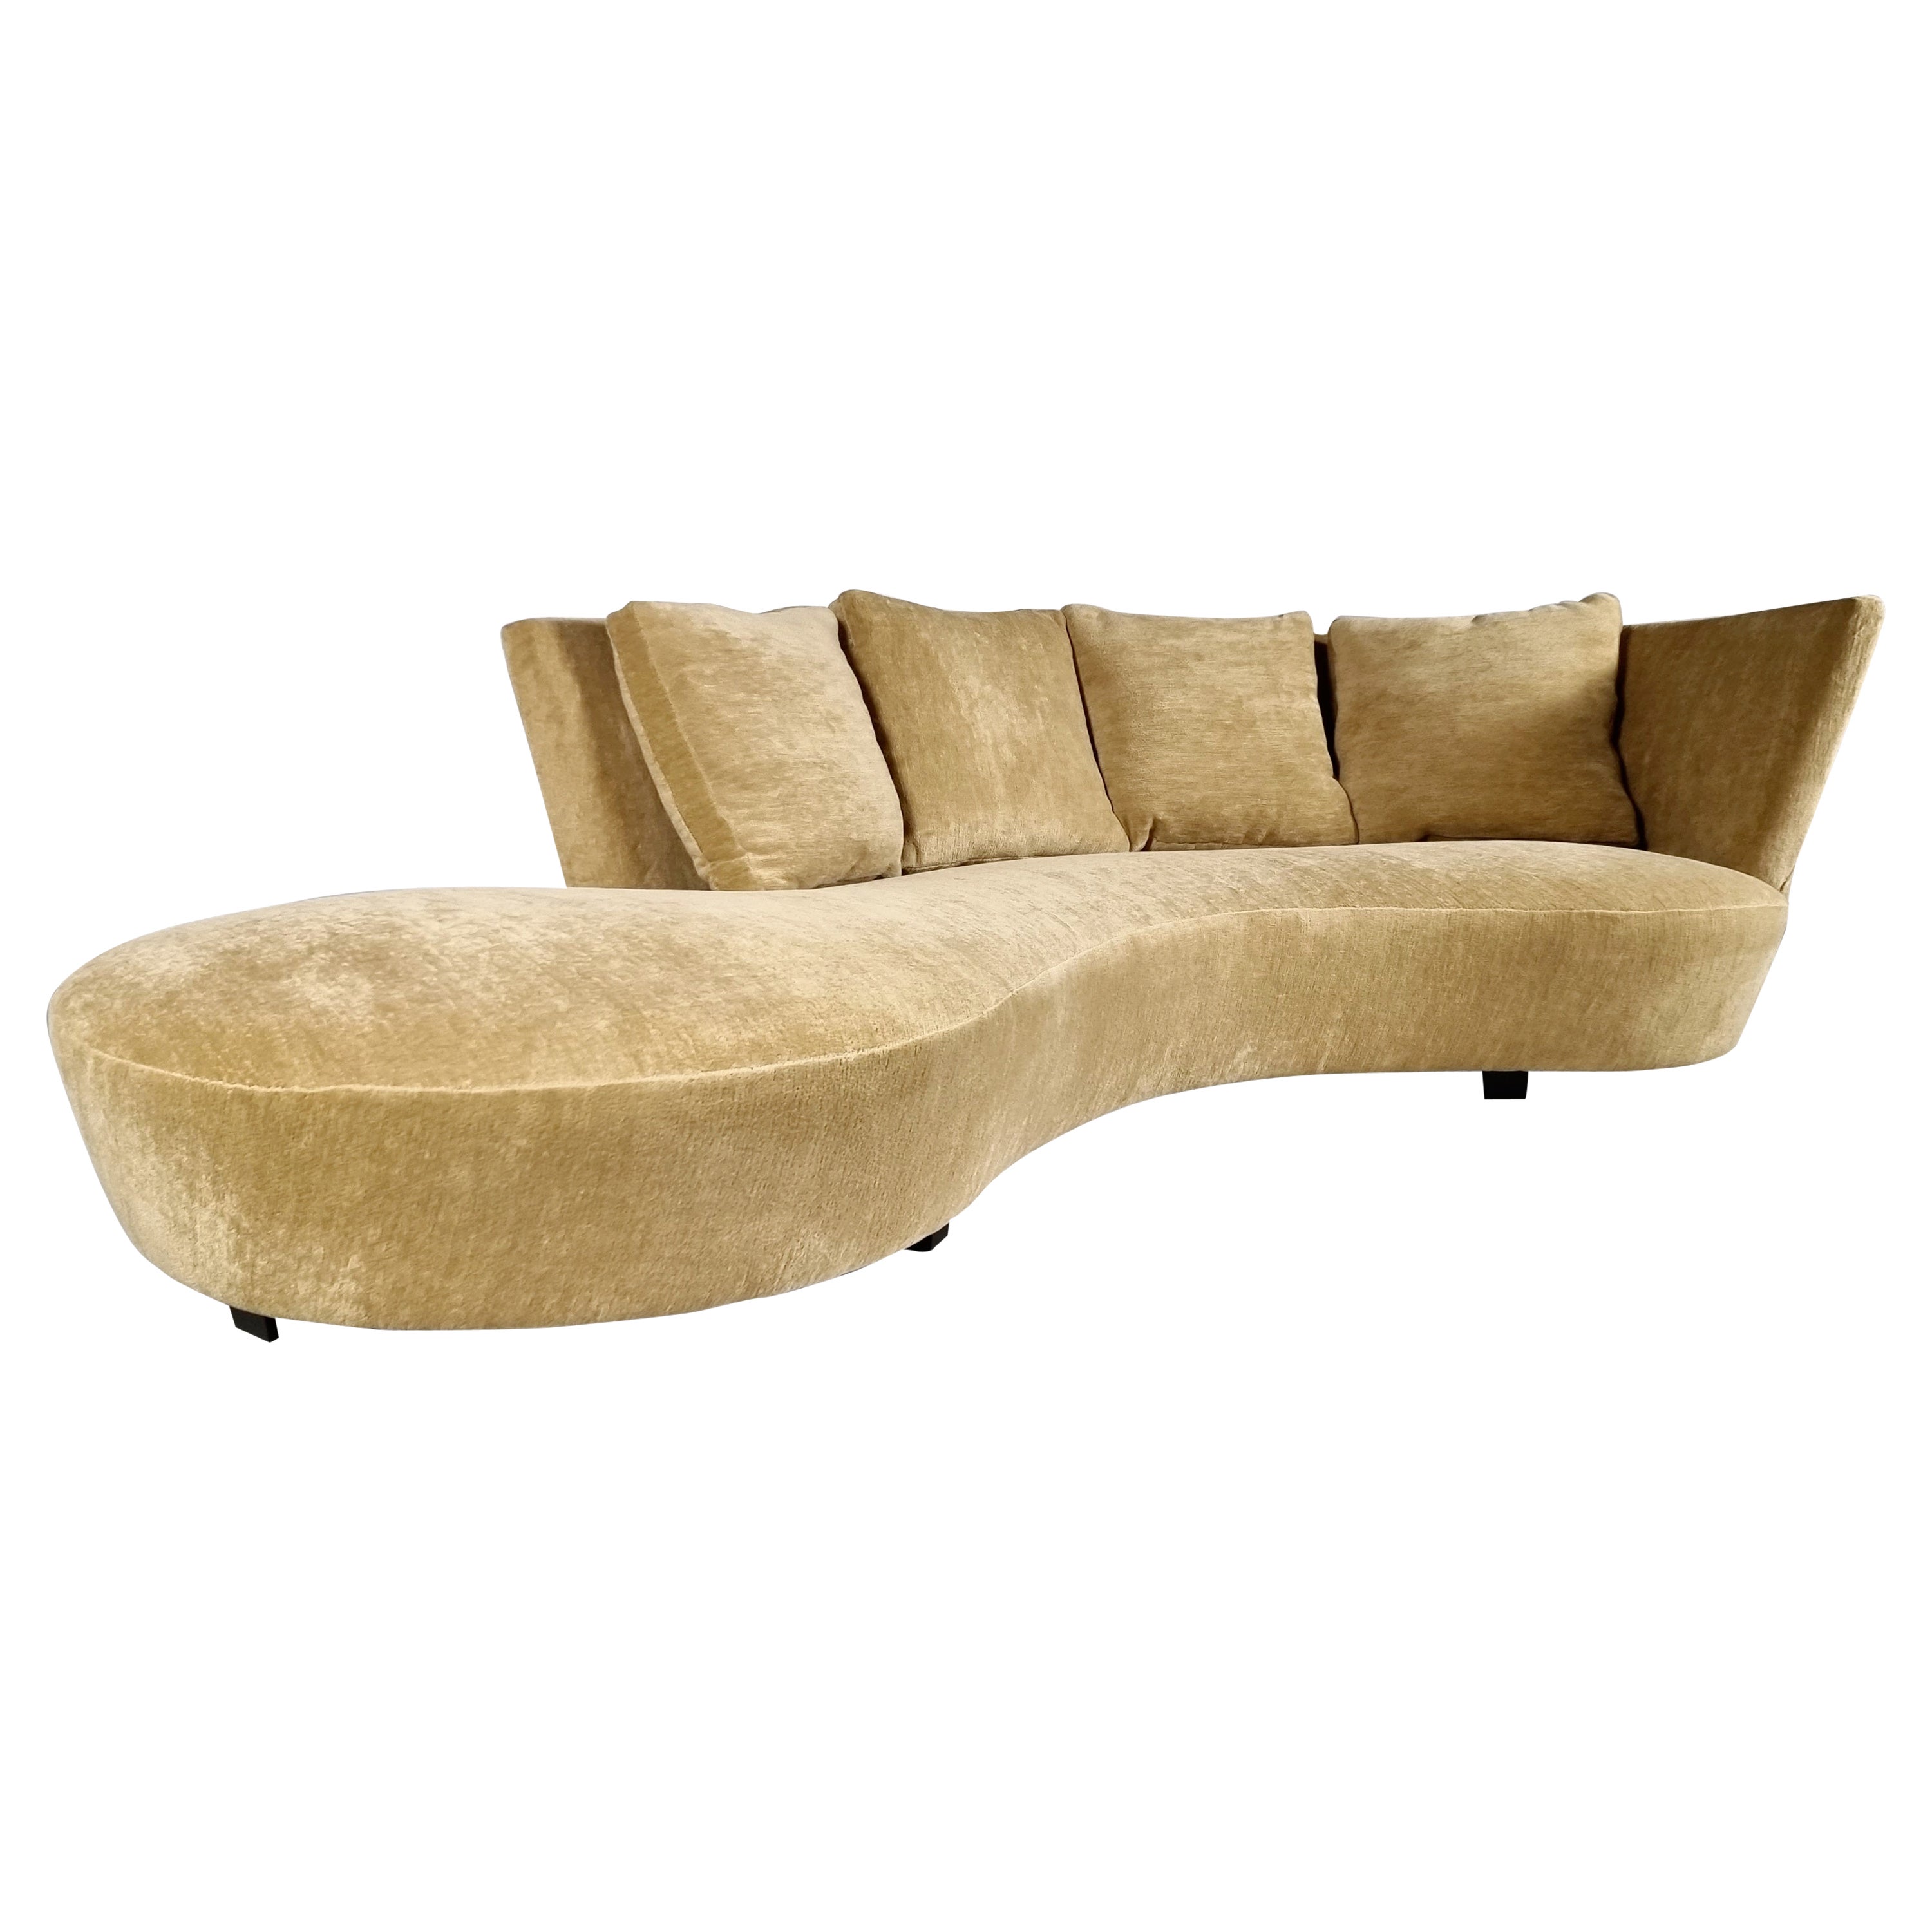 Crescent Sofa Reupholstered in Chenille Fabric by Vladimir Kagan